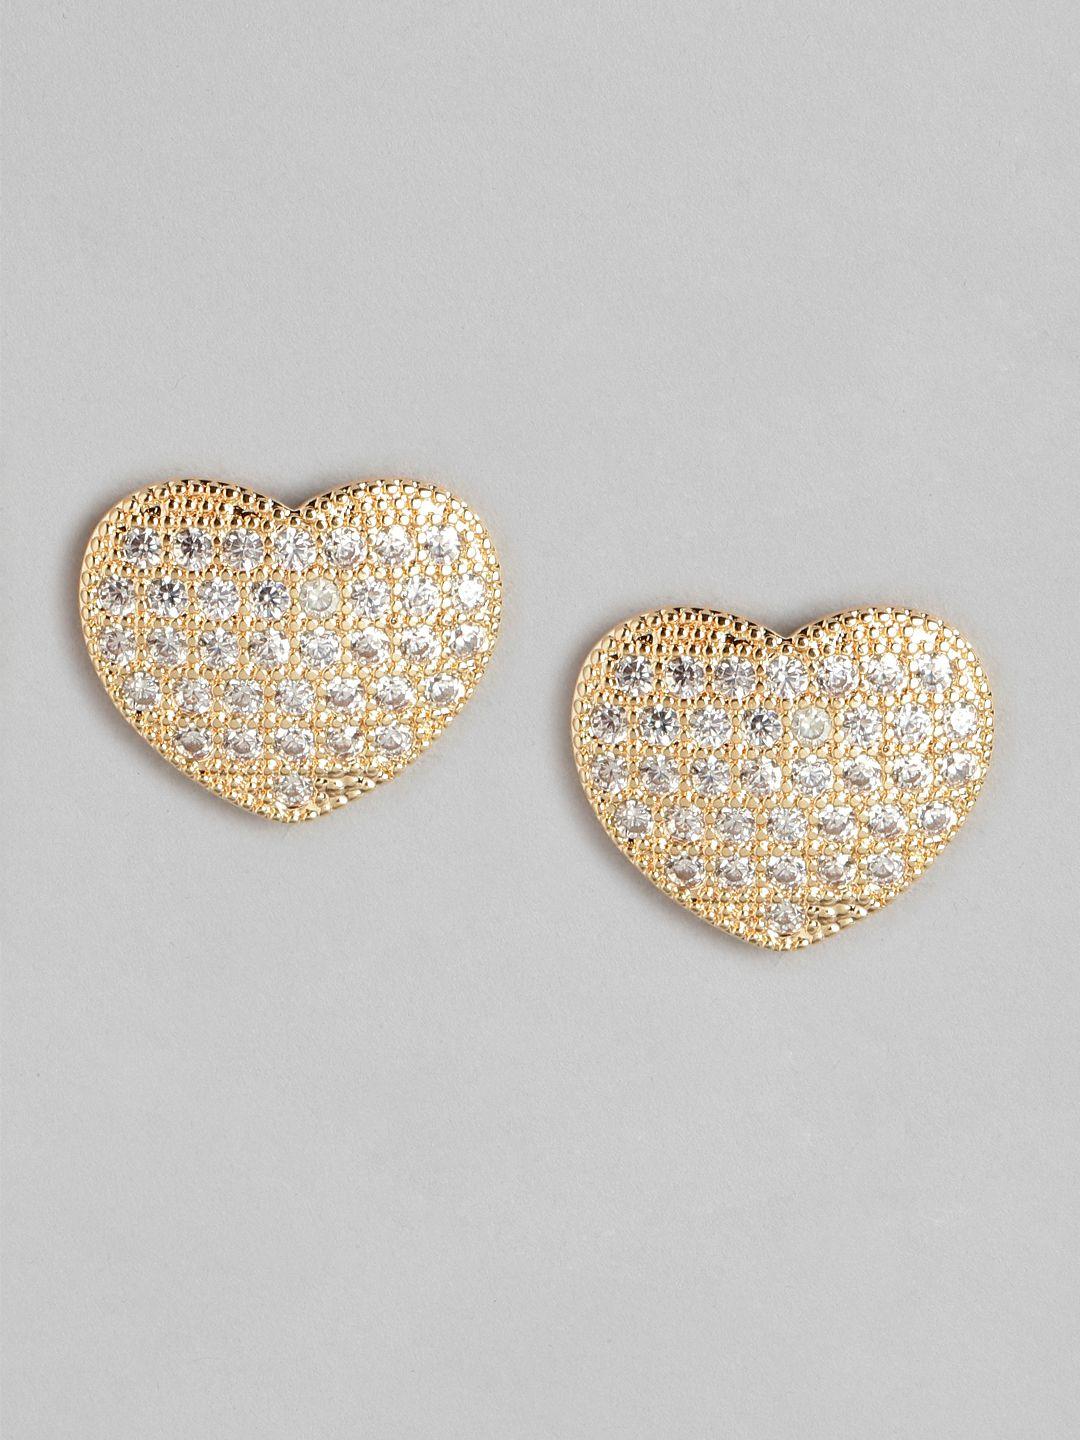 aadvik designs gold-plated ad studded heart shaped studs earrings